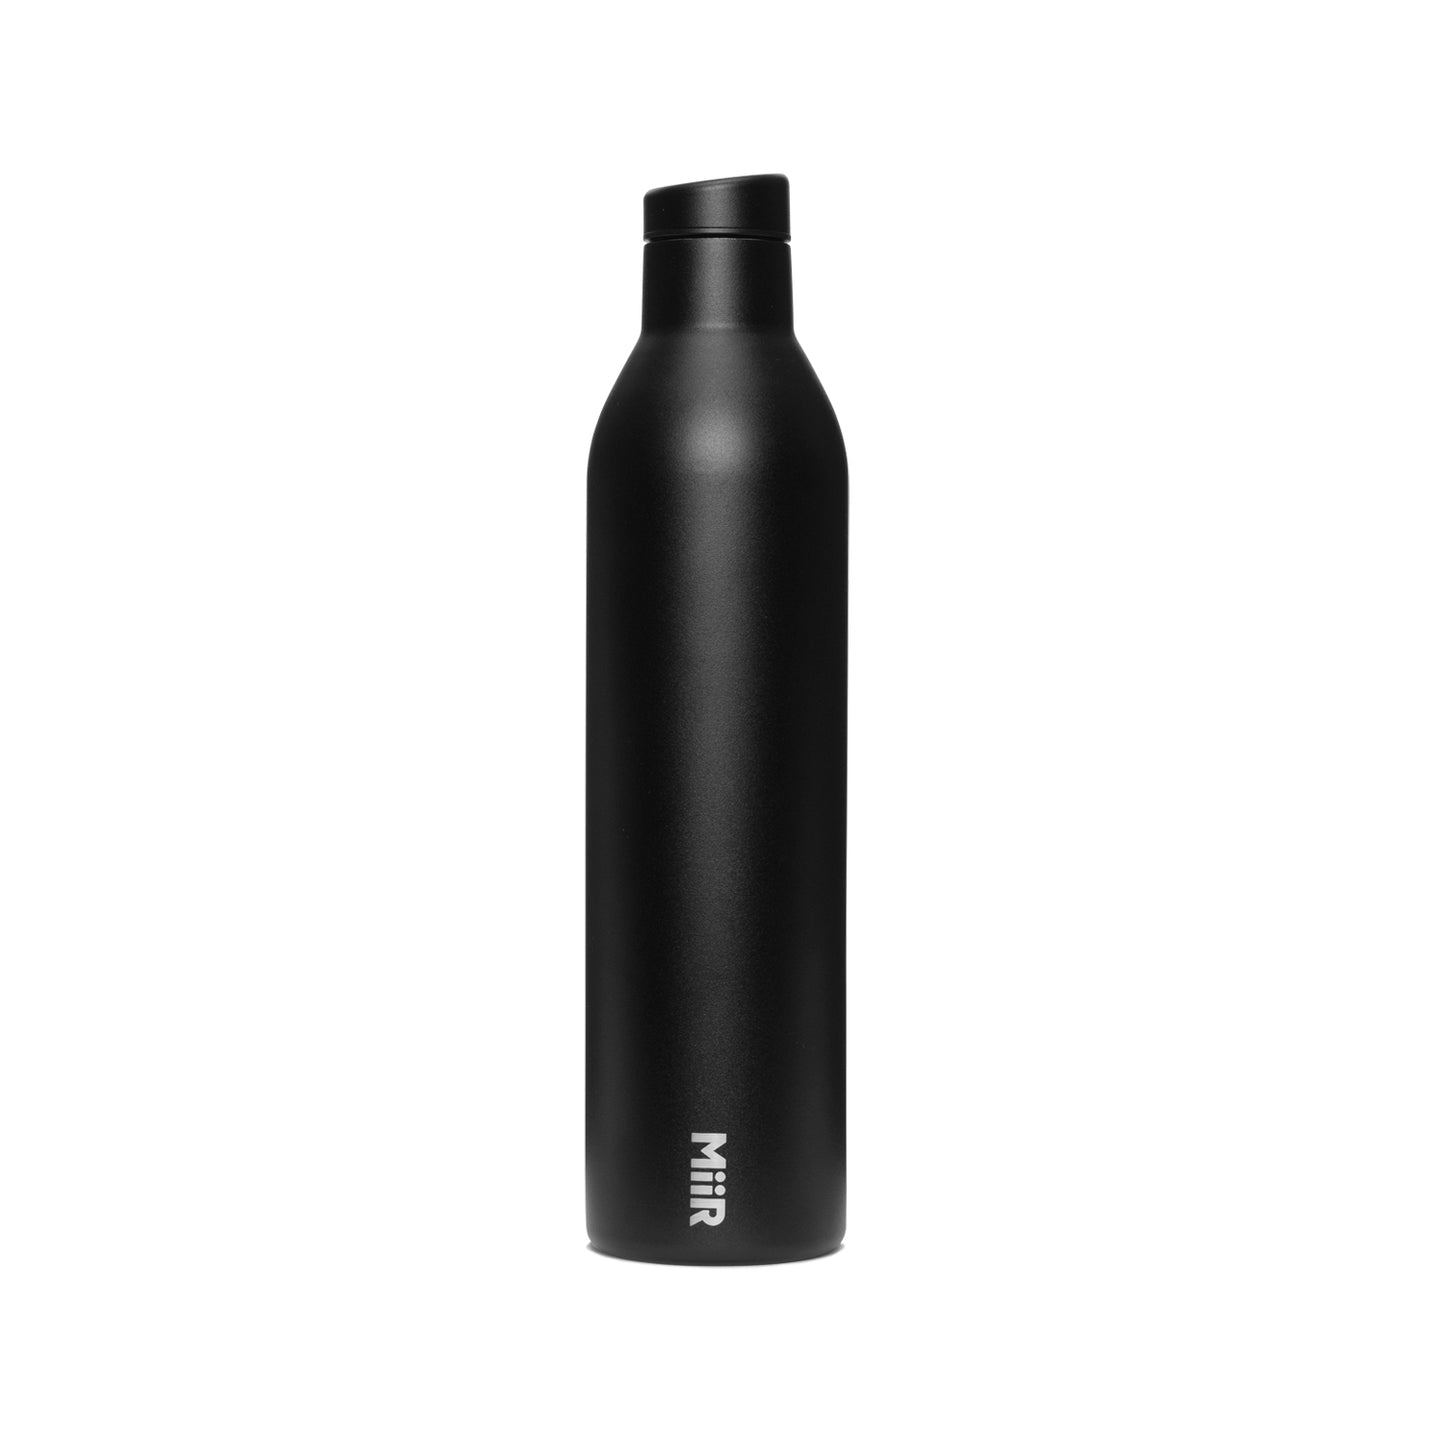 Wine bottle insulated to keep your drinks hot or cold